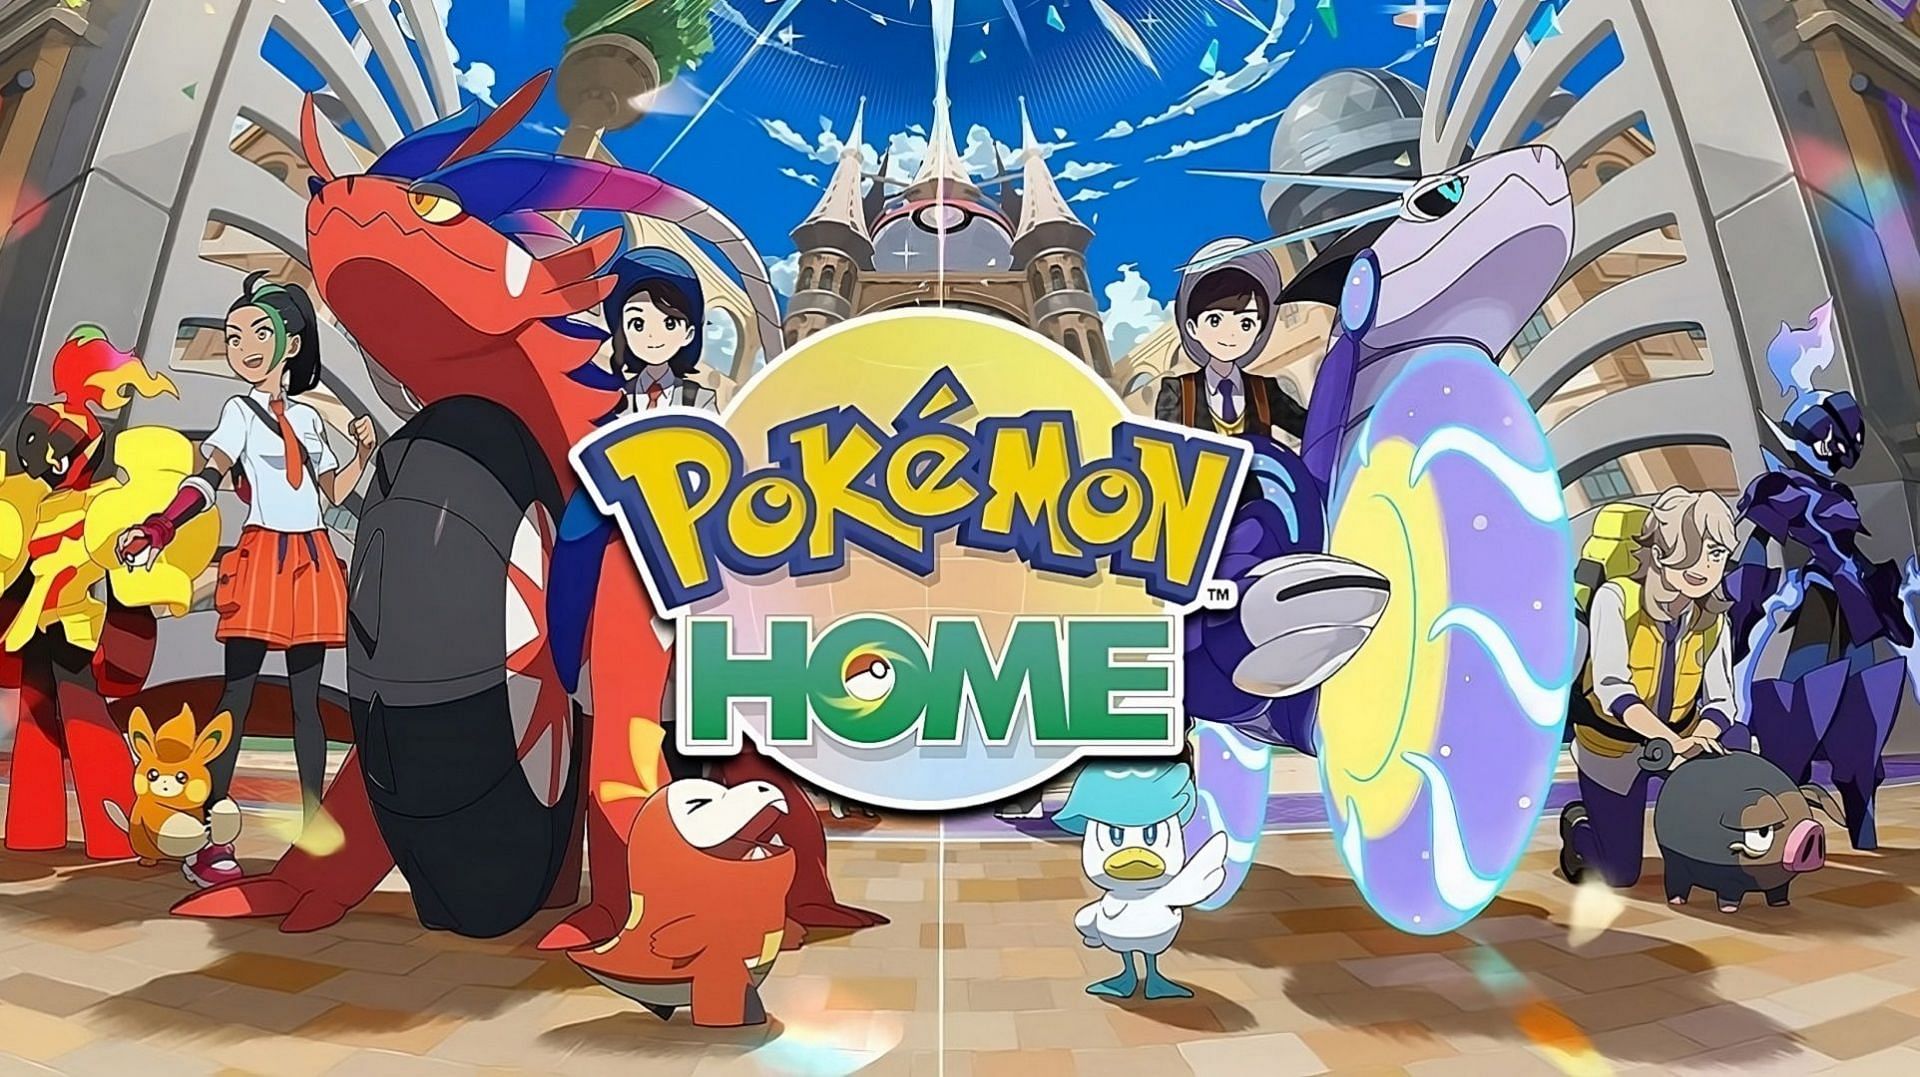 A recent leak arrived on social media pointing to the completion of the Pokemon HOME update for Scarlet and Violet (Image via @PearlEnthu2/Twitter)